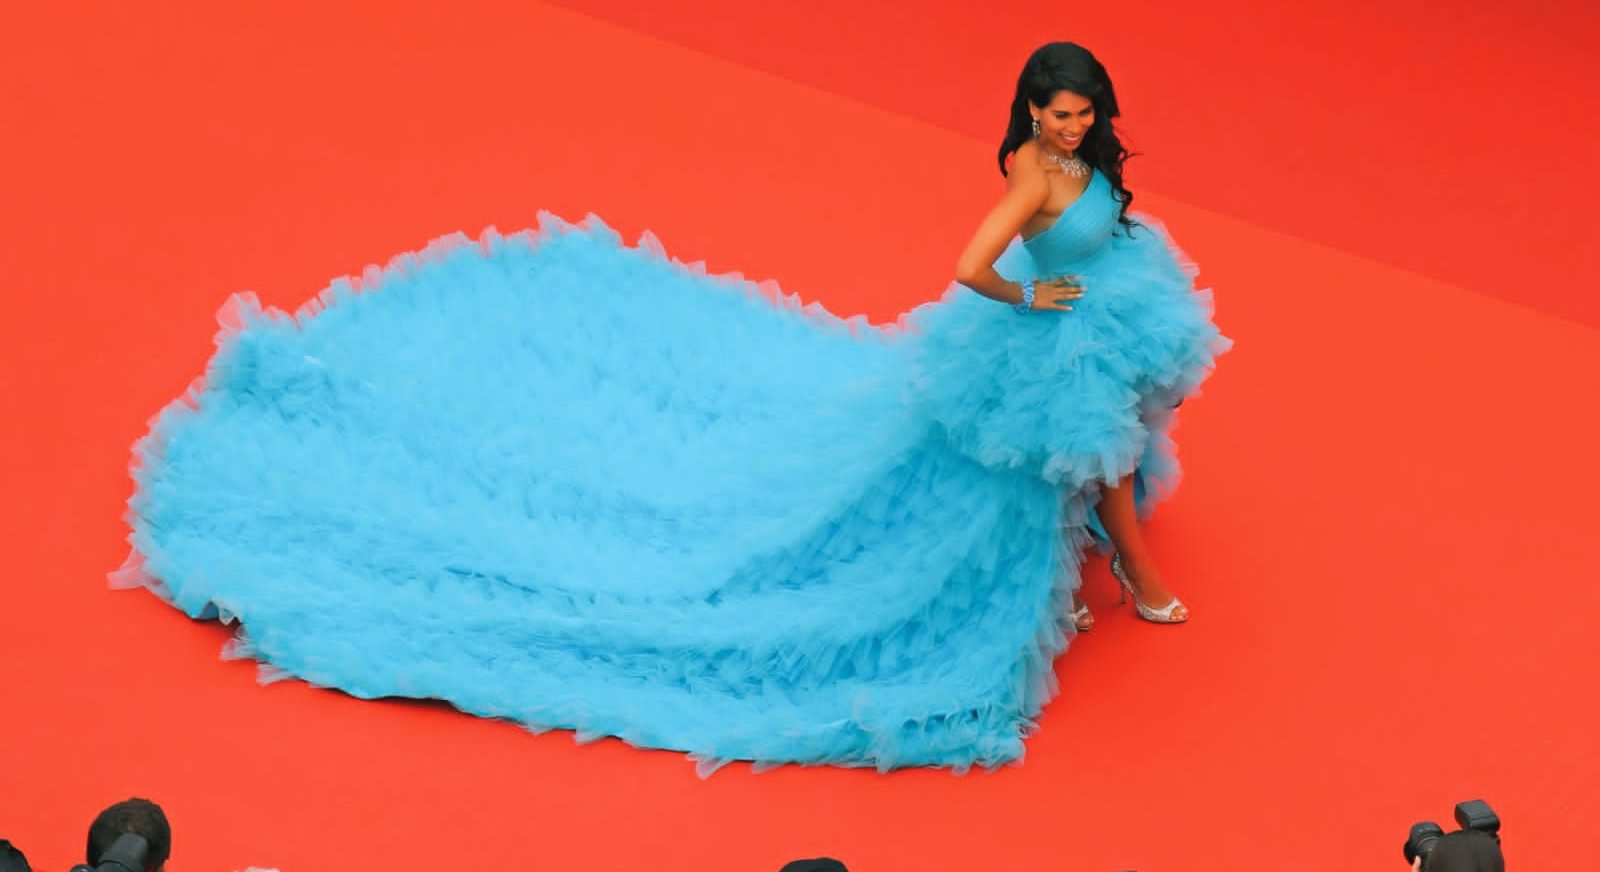 International Star Fagun Thakrar was listed as best dressed at the 76th Cannes Film Festival’s opening night ceremony!